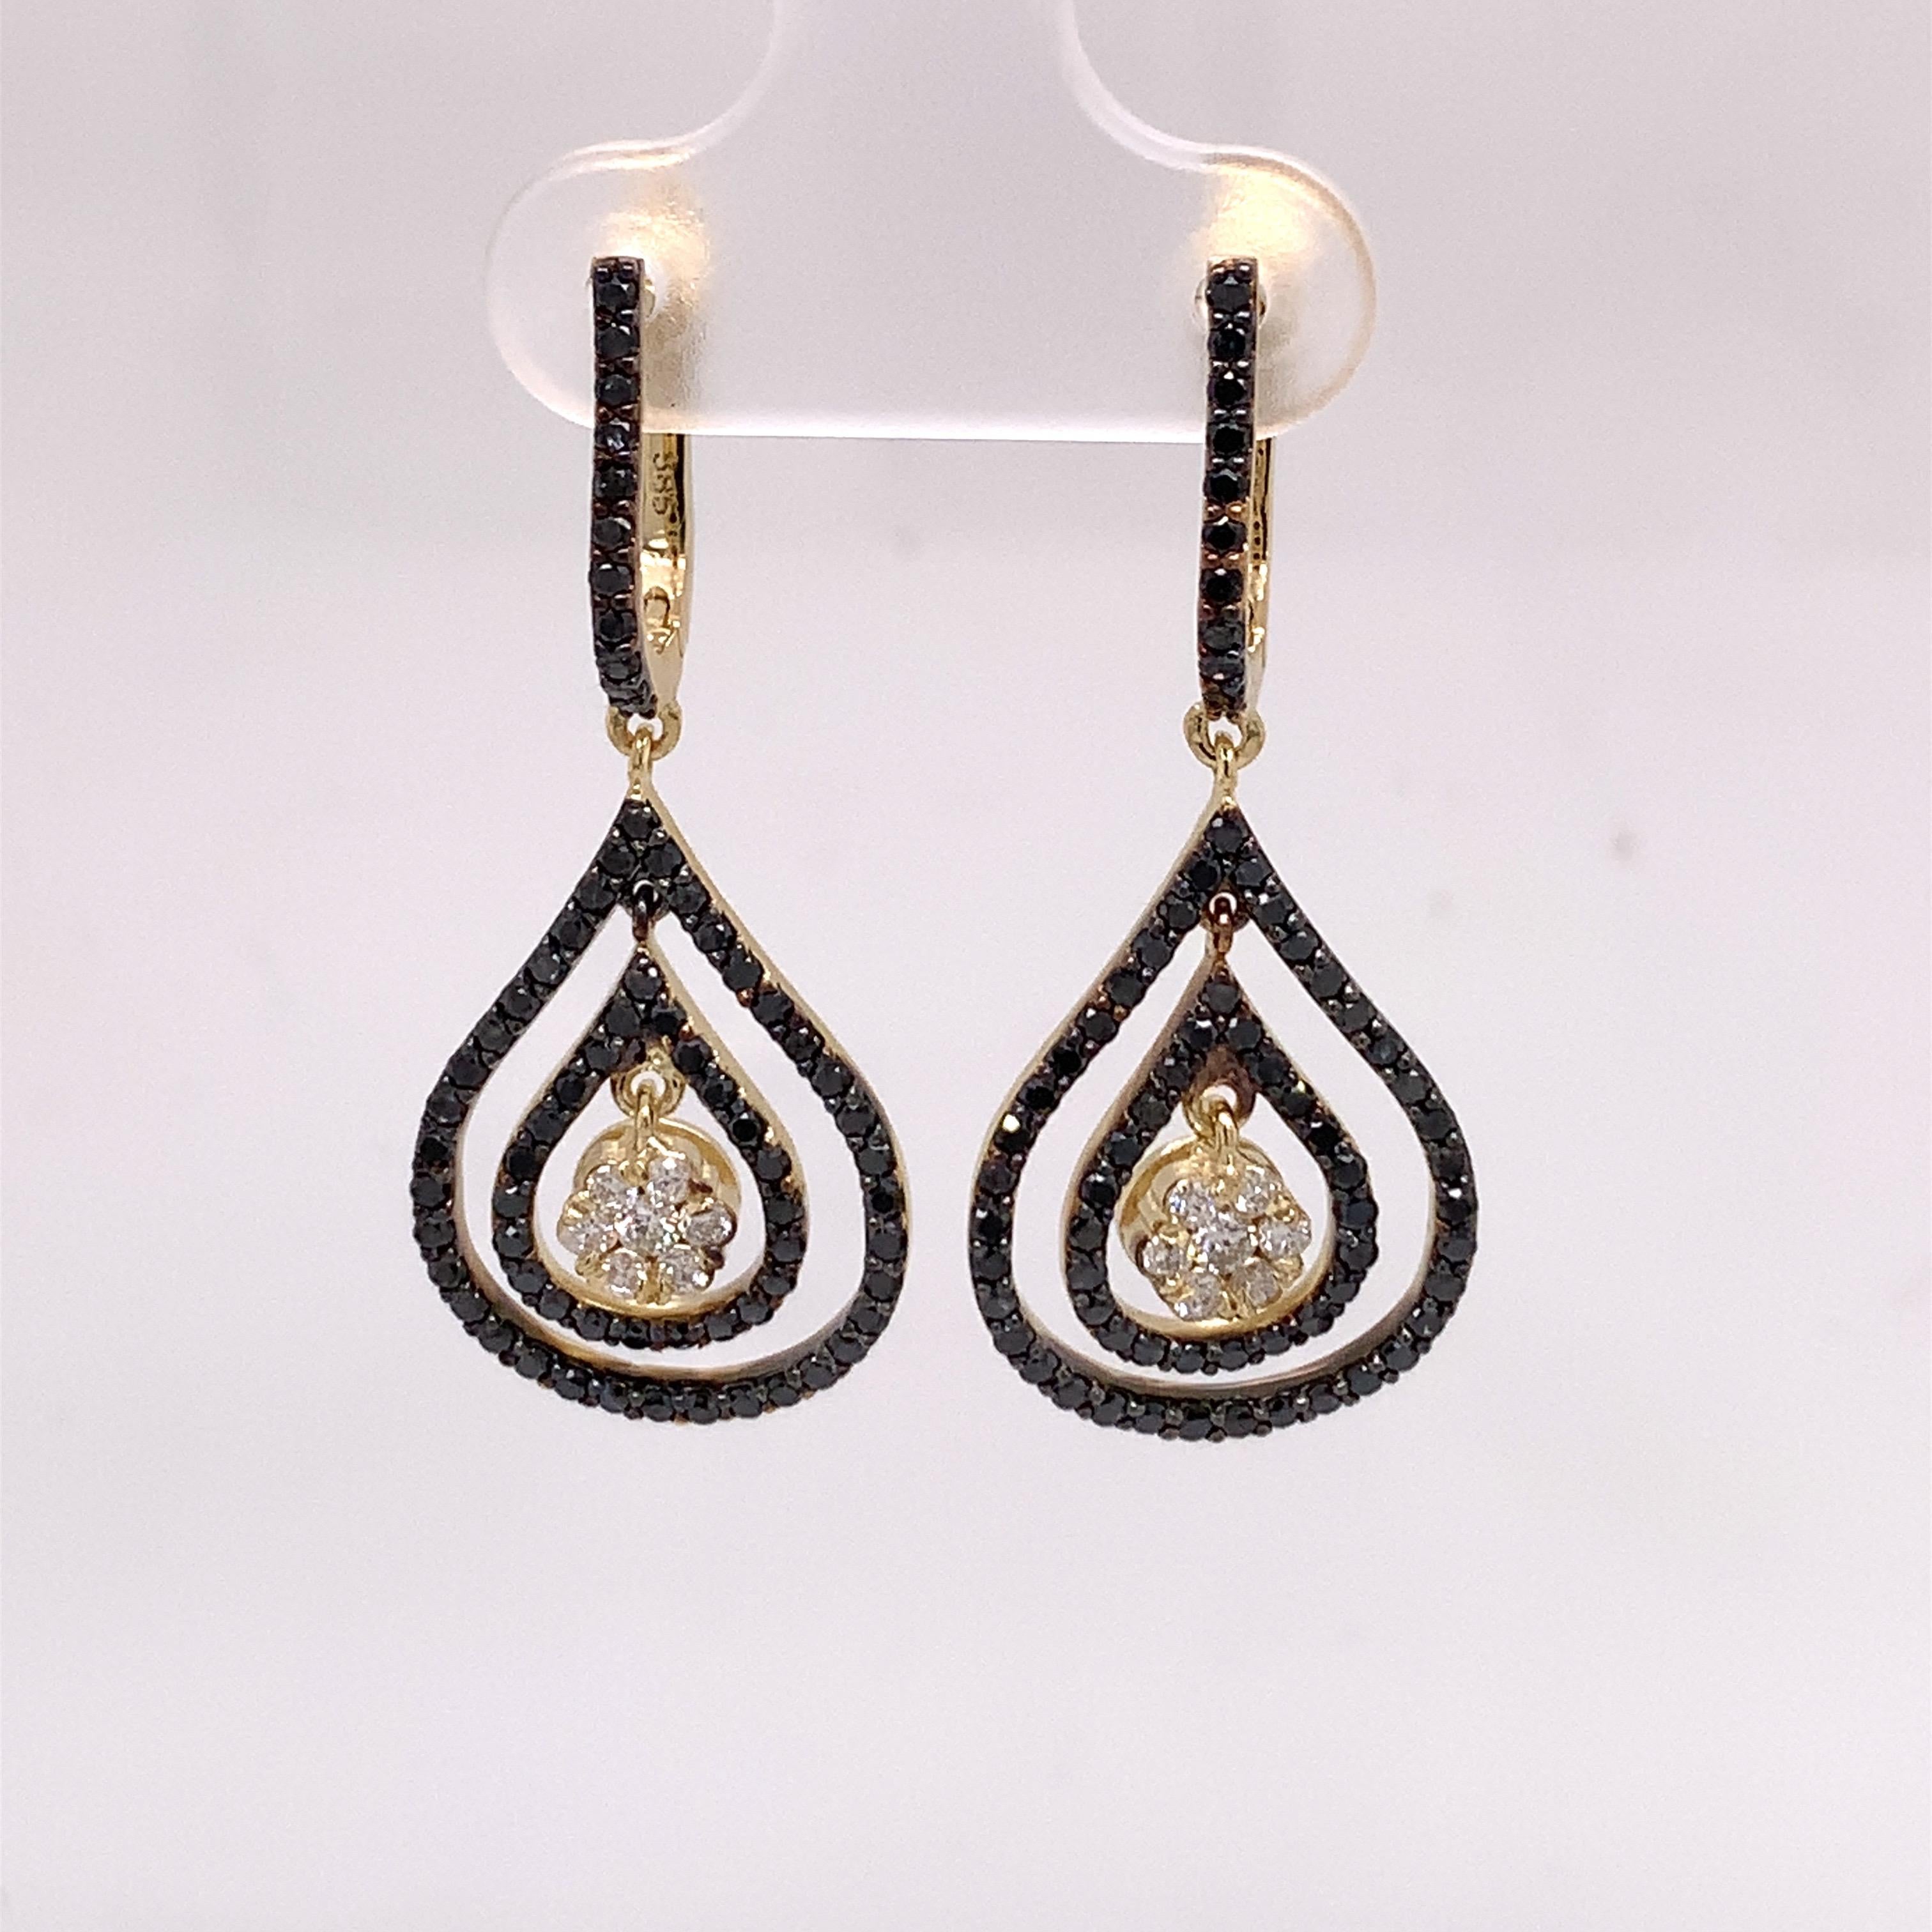 The 1.53 Carat timeless dangle earrings showcase the beauty of timeless classic earrings and a modern mix of black and white diamonds. The diamonds are set on 14K yellow gold. 

Jewel details: 
White Diamonds-
0.23 Carat Total Weight
E-F / VS
Black